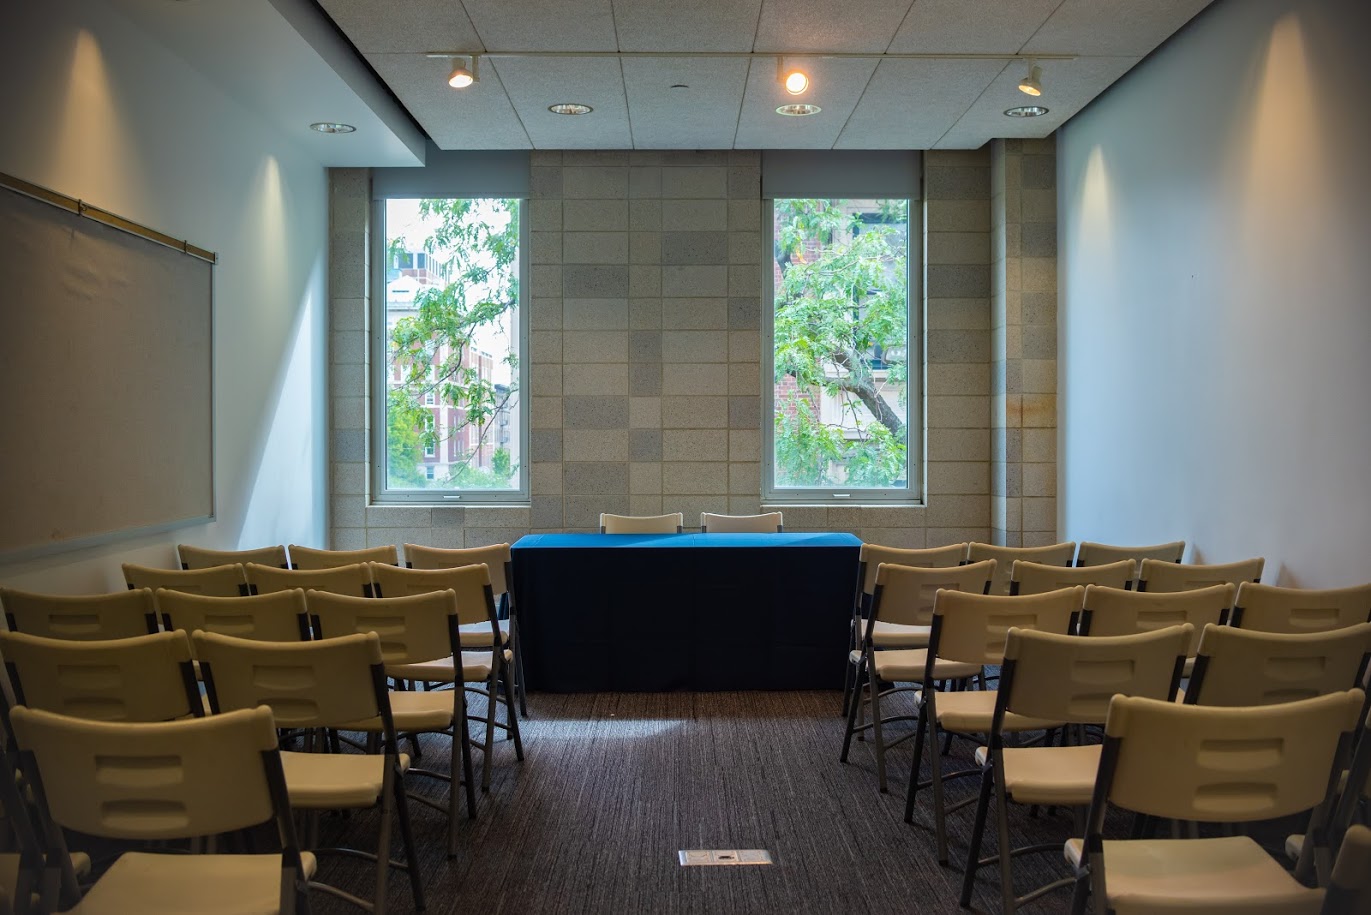 A grey-carpeted room with rows of white folding chairs facing a table covered with a blue table cloth. Two windows allow natural light into the room.